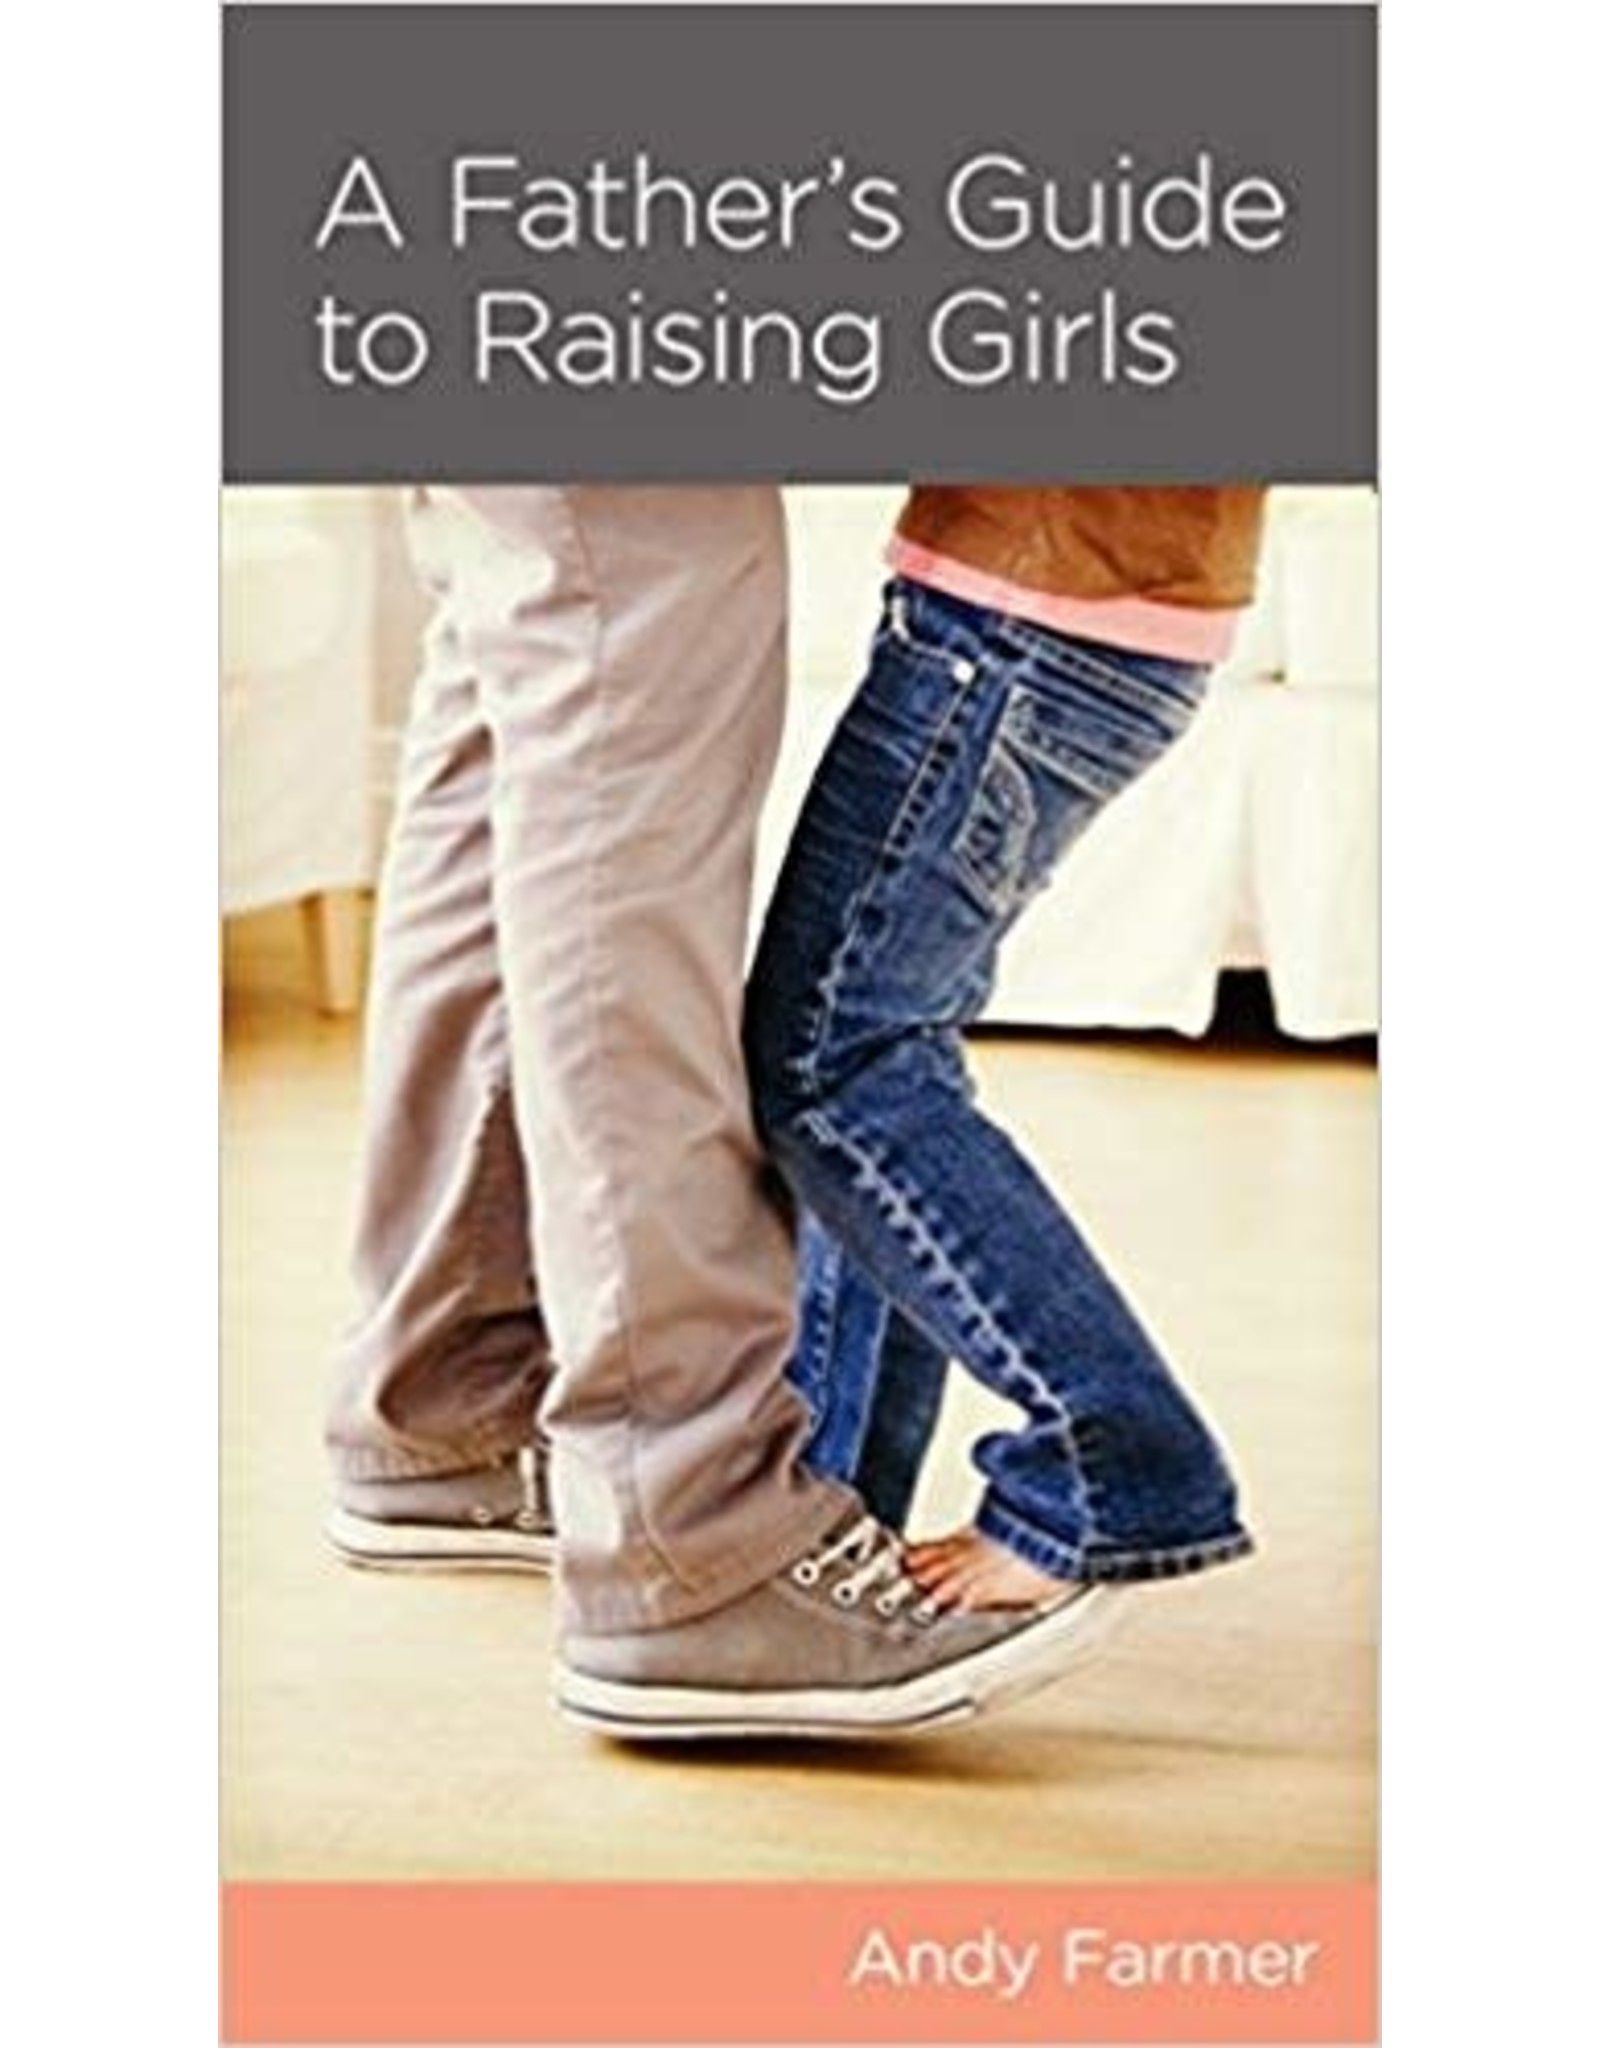 Andy Farmer A Father's Guide to Raising Girls